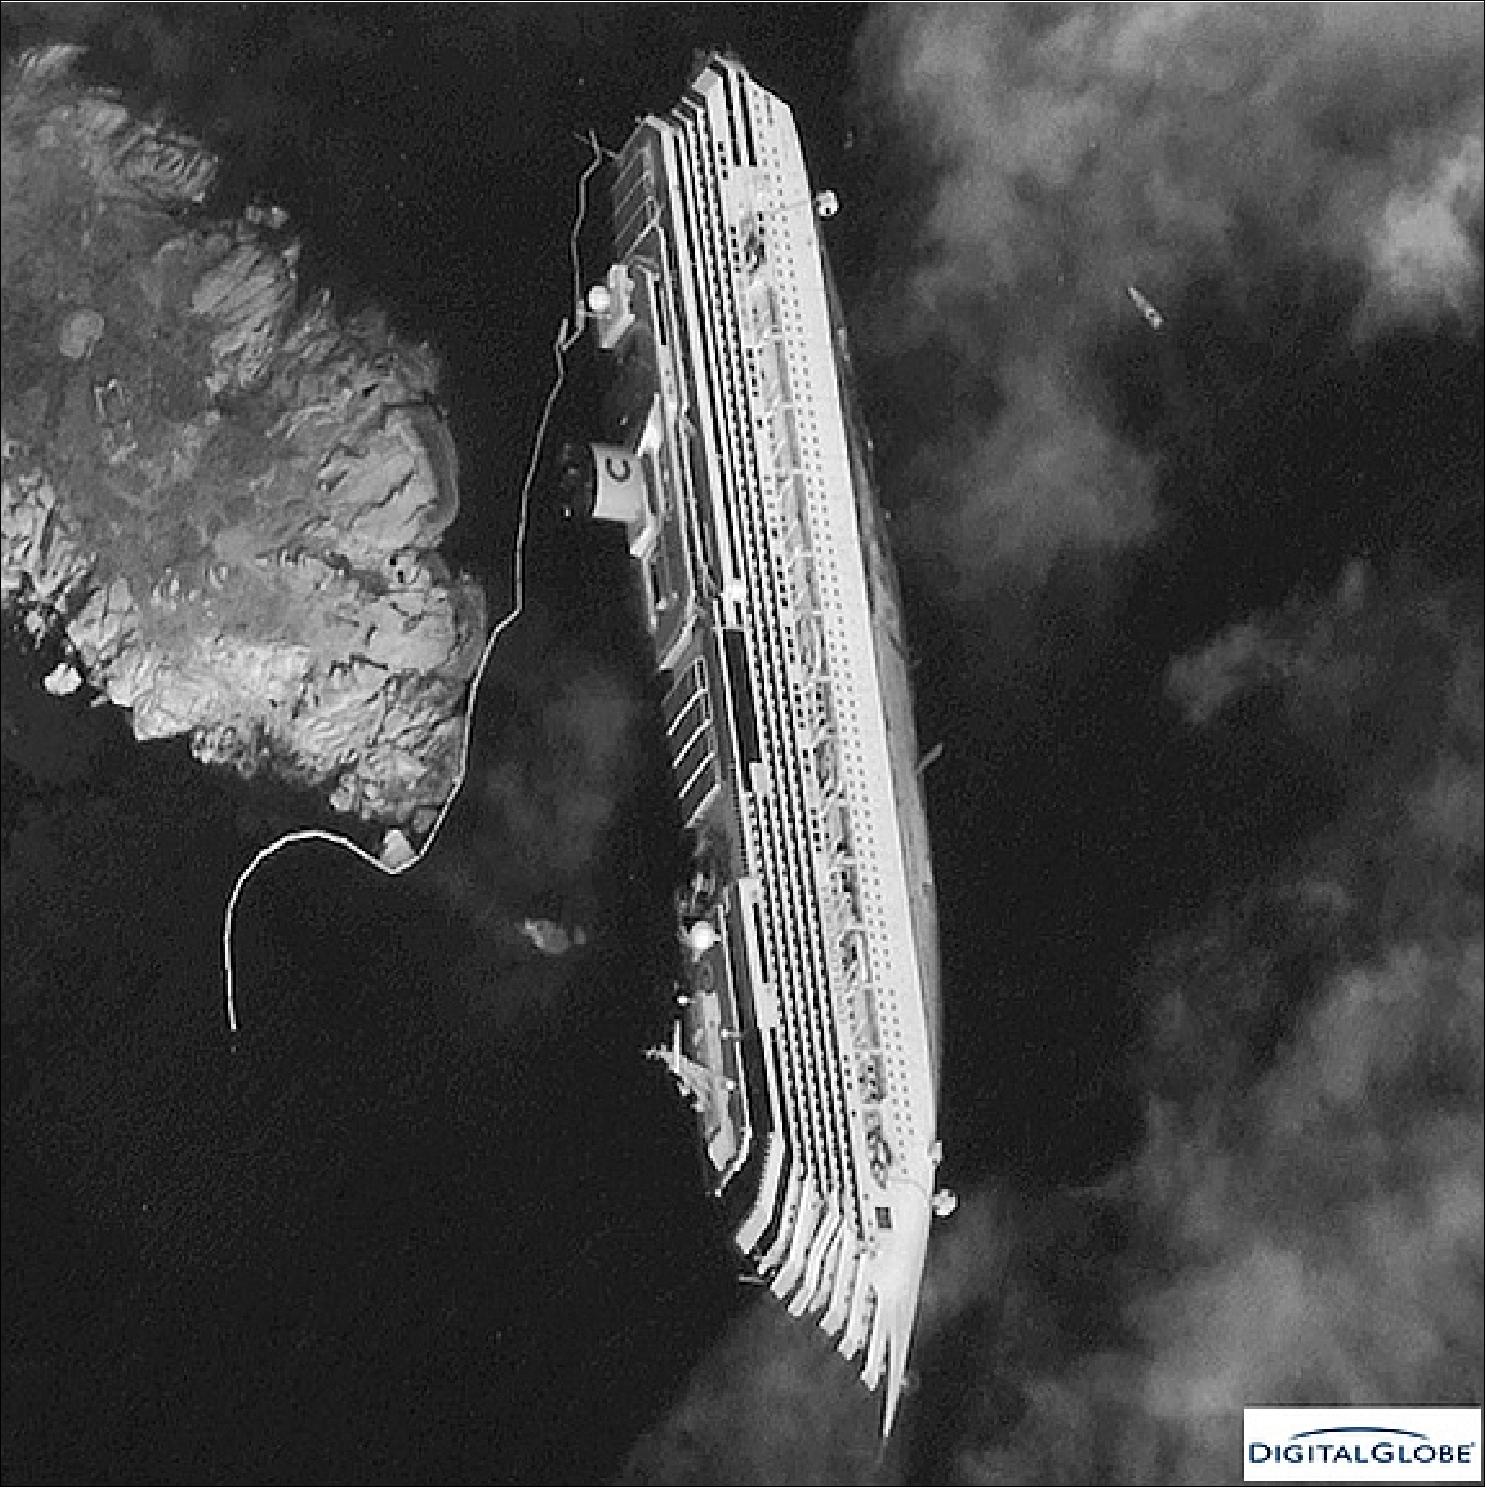 Figure 6: Closeup image of WorldView-1 WV60 camera of the capsized cruise ship Costa Concordia on January 17, 2012 (image credit: Digital Globe) 15)